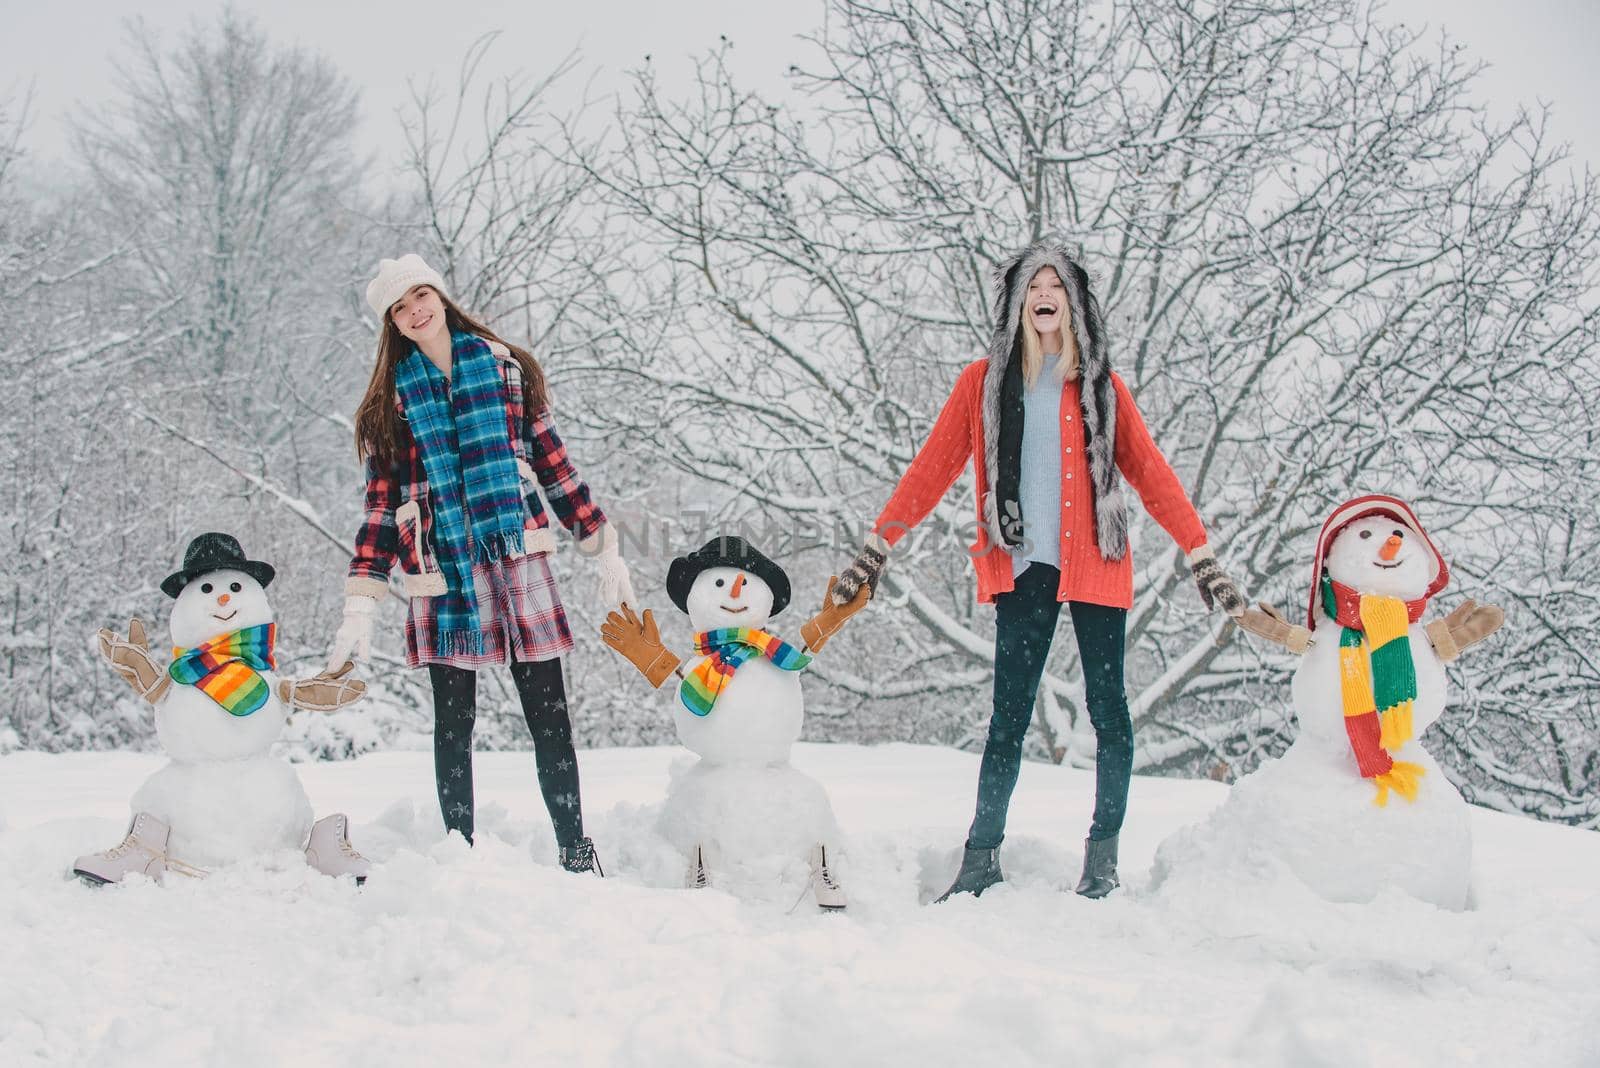 Group of girls with snowman outdoors. Students winter party and Christmas celebration. Two Joyful young women having fun with snowman. Merry Christmas and Happy new year